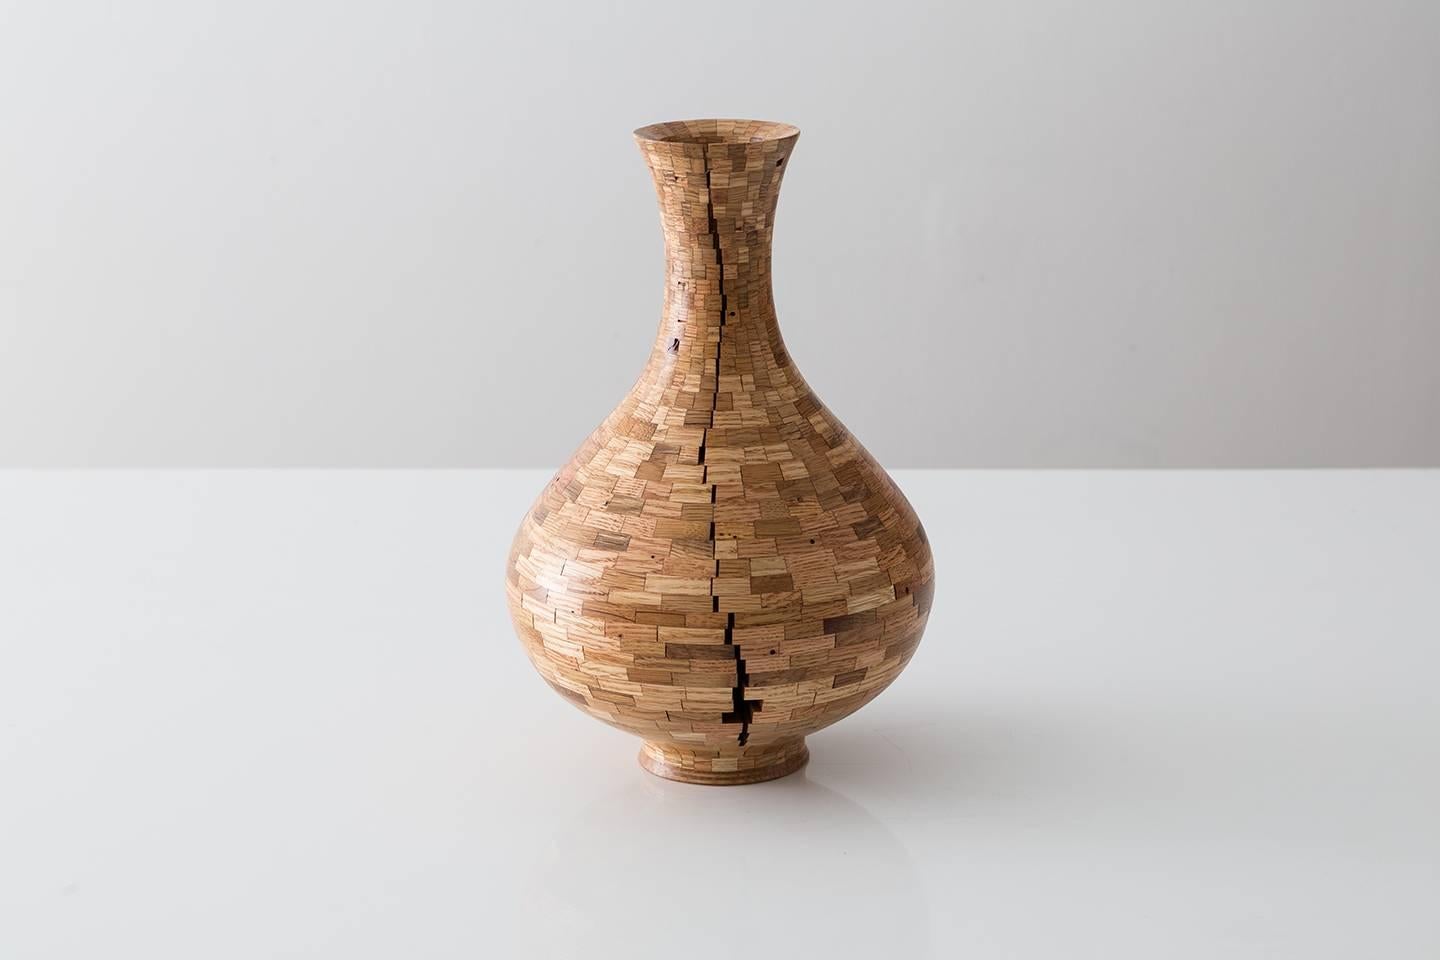 Part of Richard Haining's Stacked collection, this asymmetrical vessel utilizes reclaimed red and white oak. The salvaged wood offcuts were sourced from a variety of local Brooklyn wood shops, as well as from deconstructed turn of the century mill